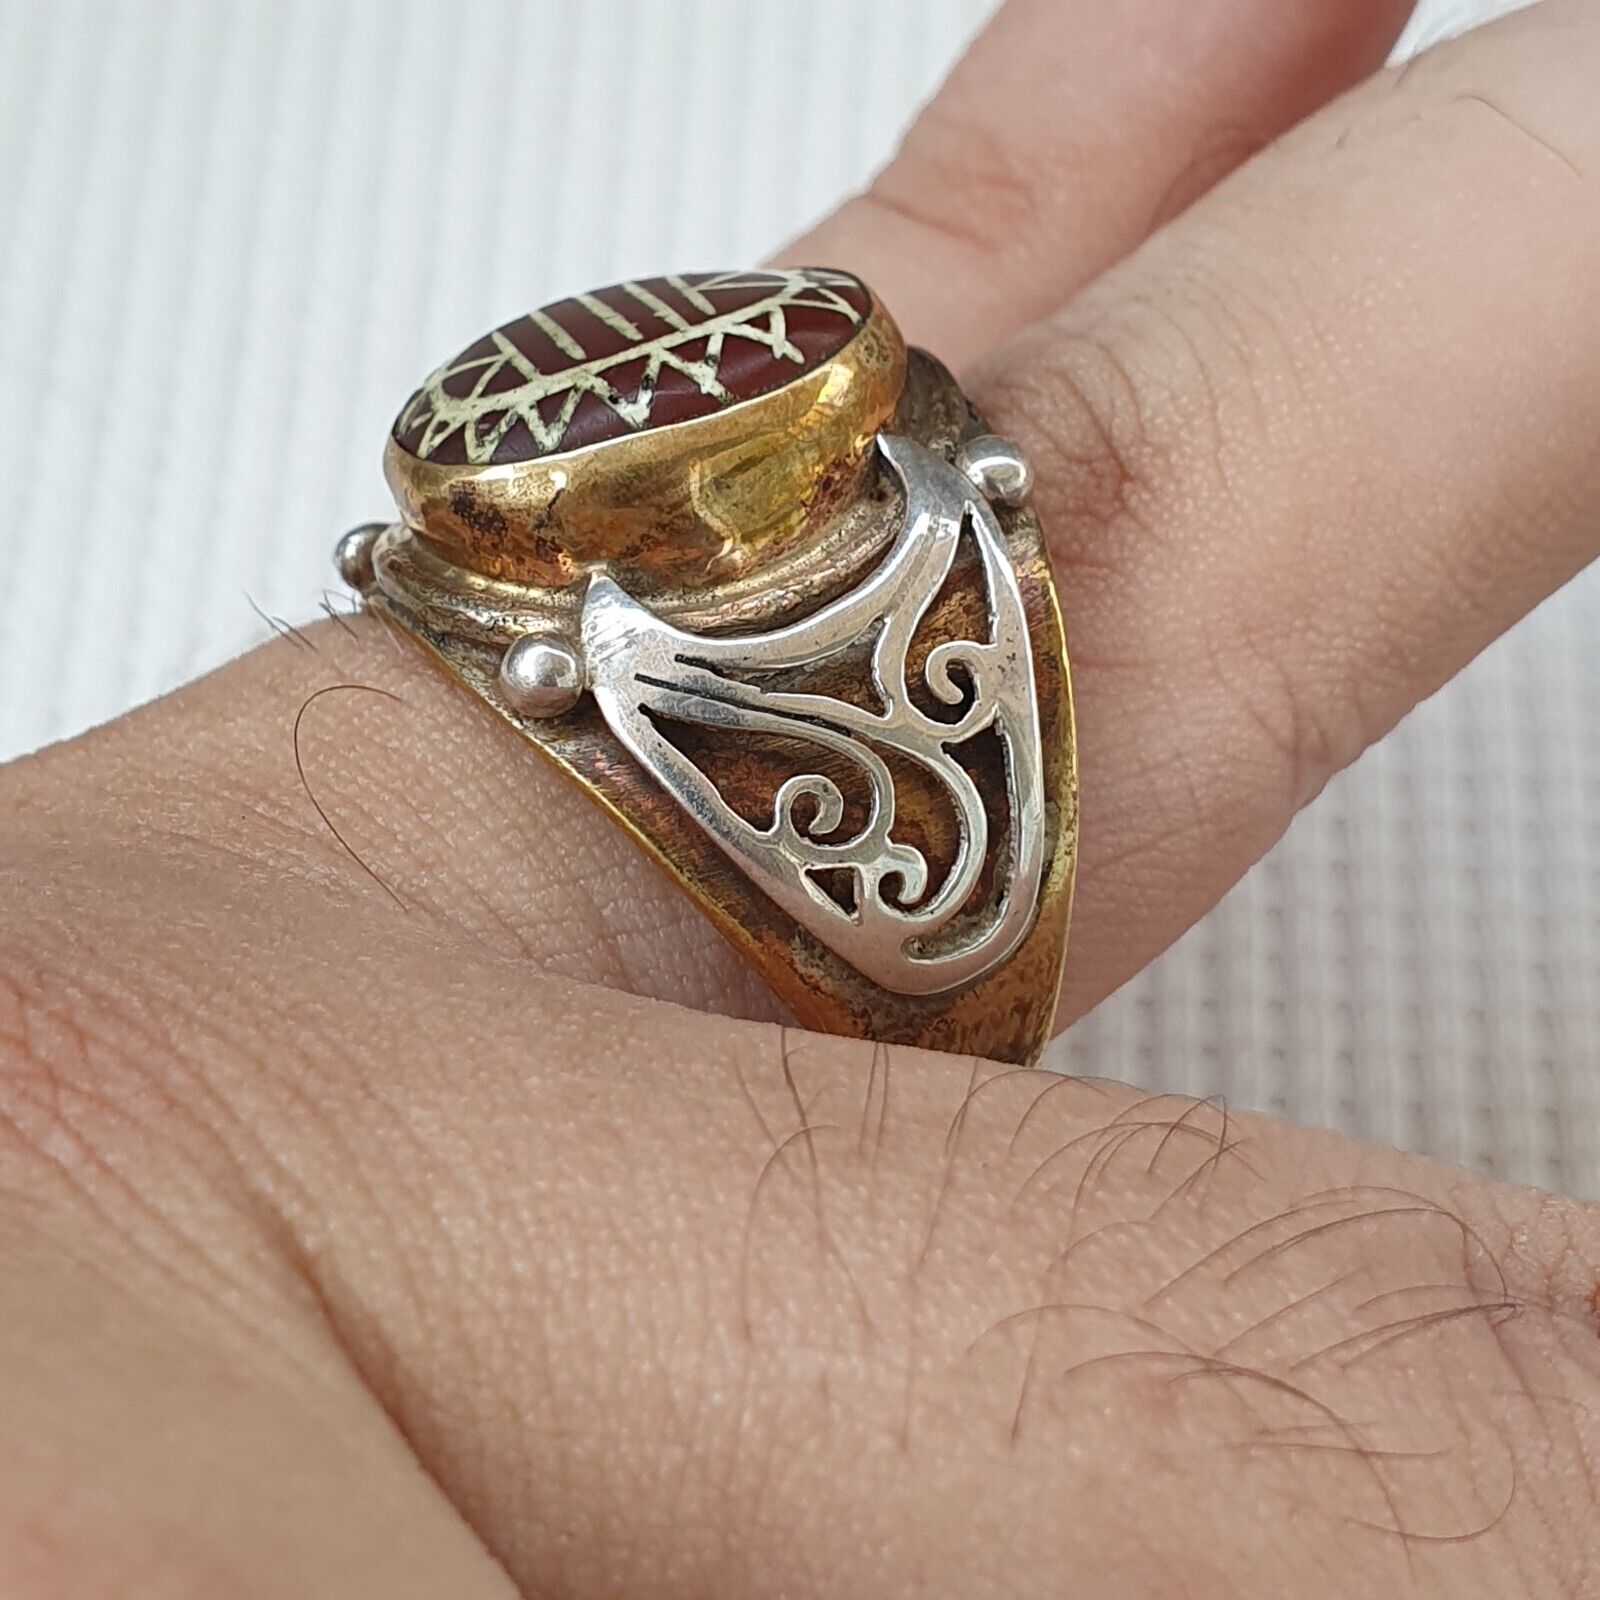 Antique Tibetan Etched Agate Center Stone Silver Inlay Gold Plated brass Ring